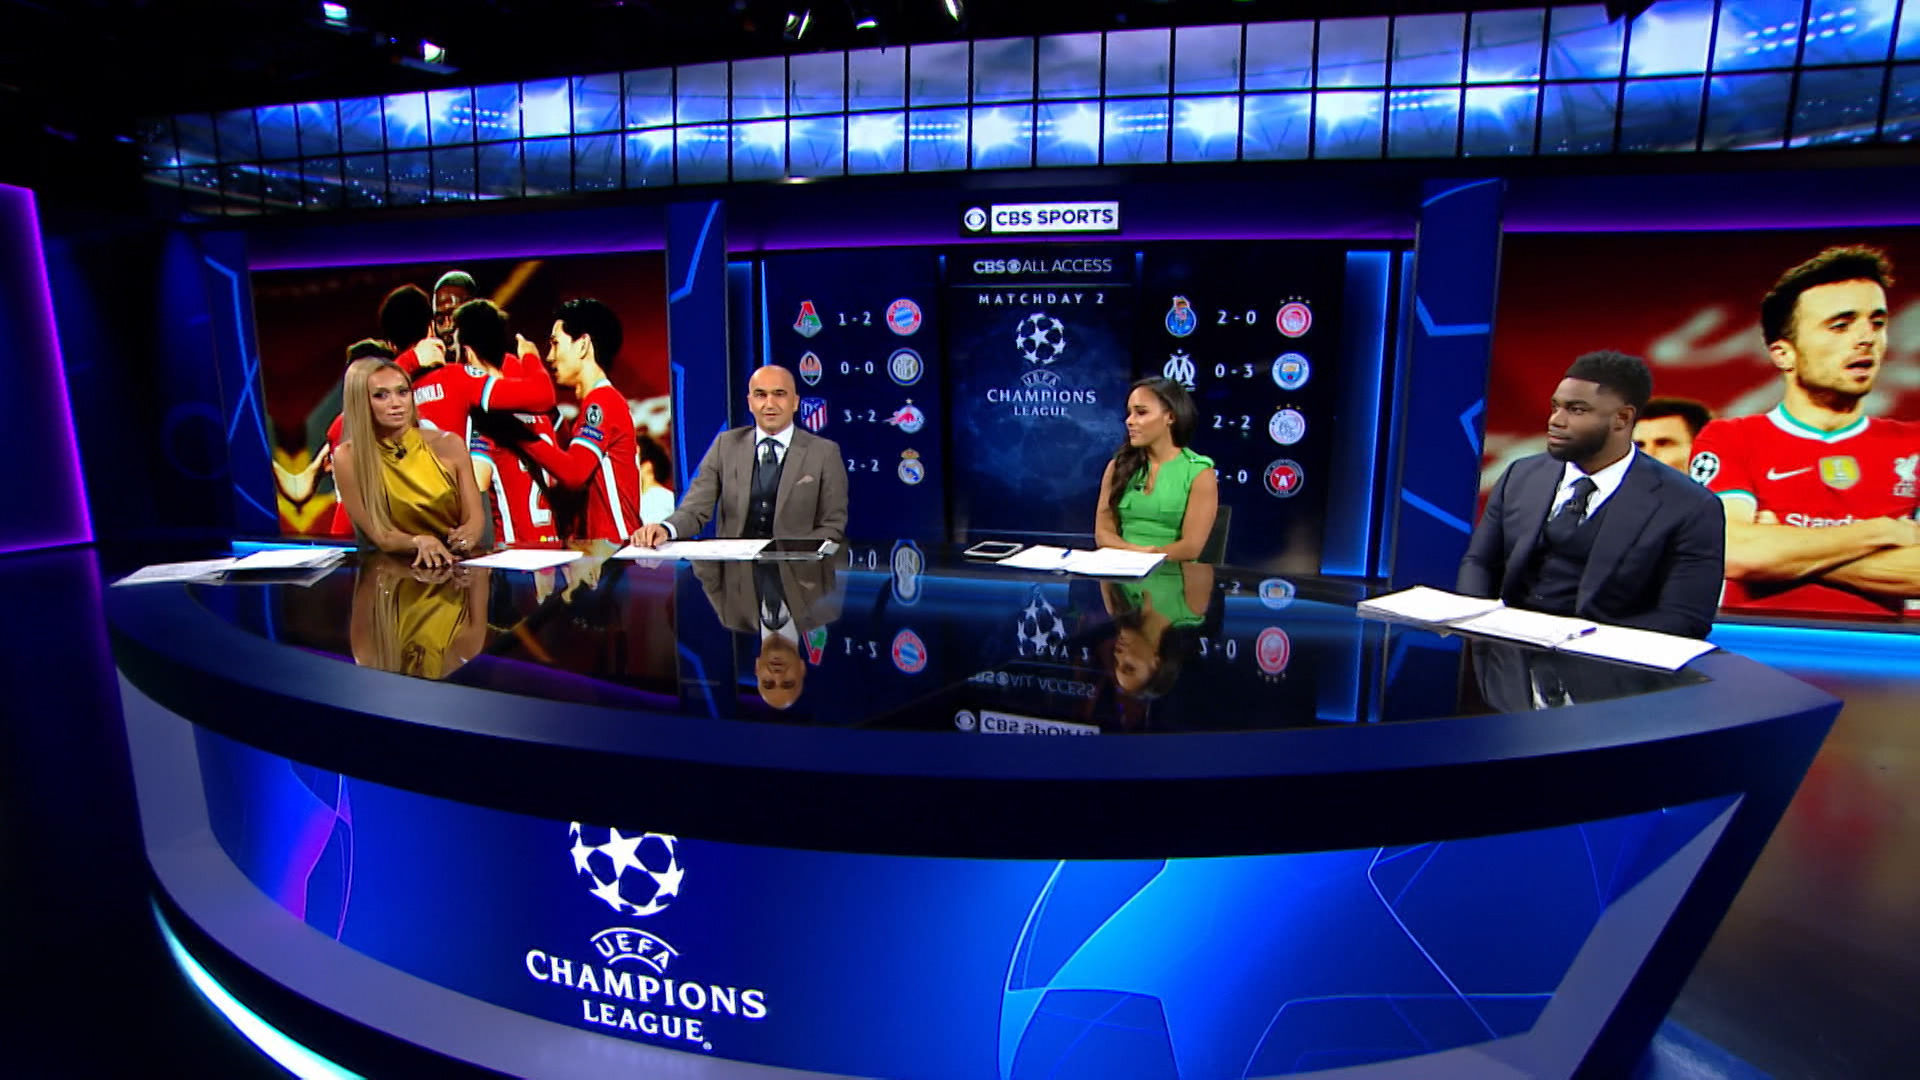 Watch UEFA Champions League Champions League Today Post Match Show - 10/27/2020